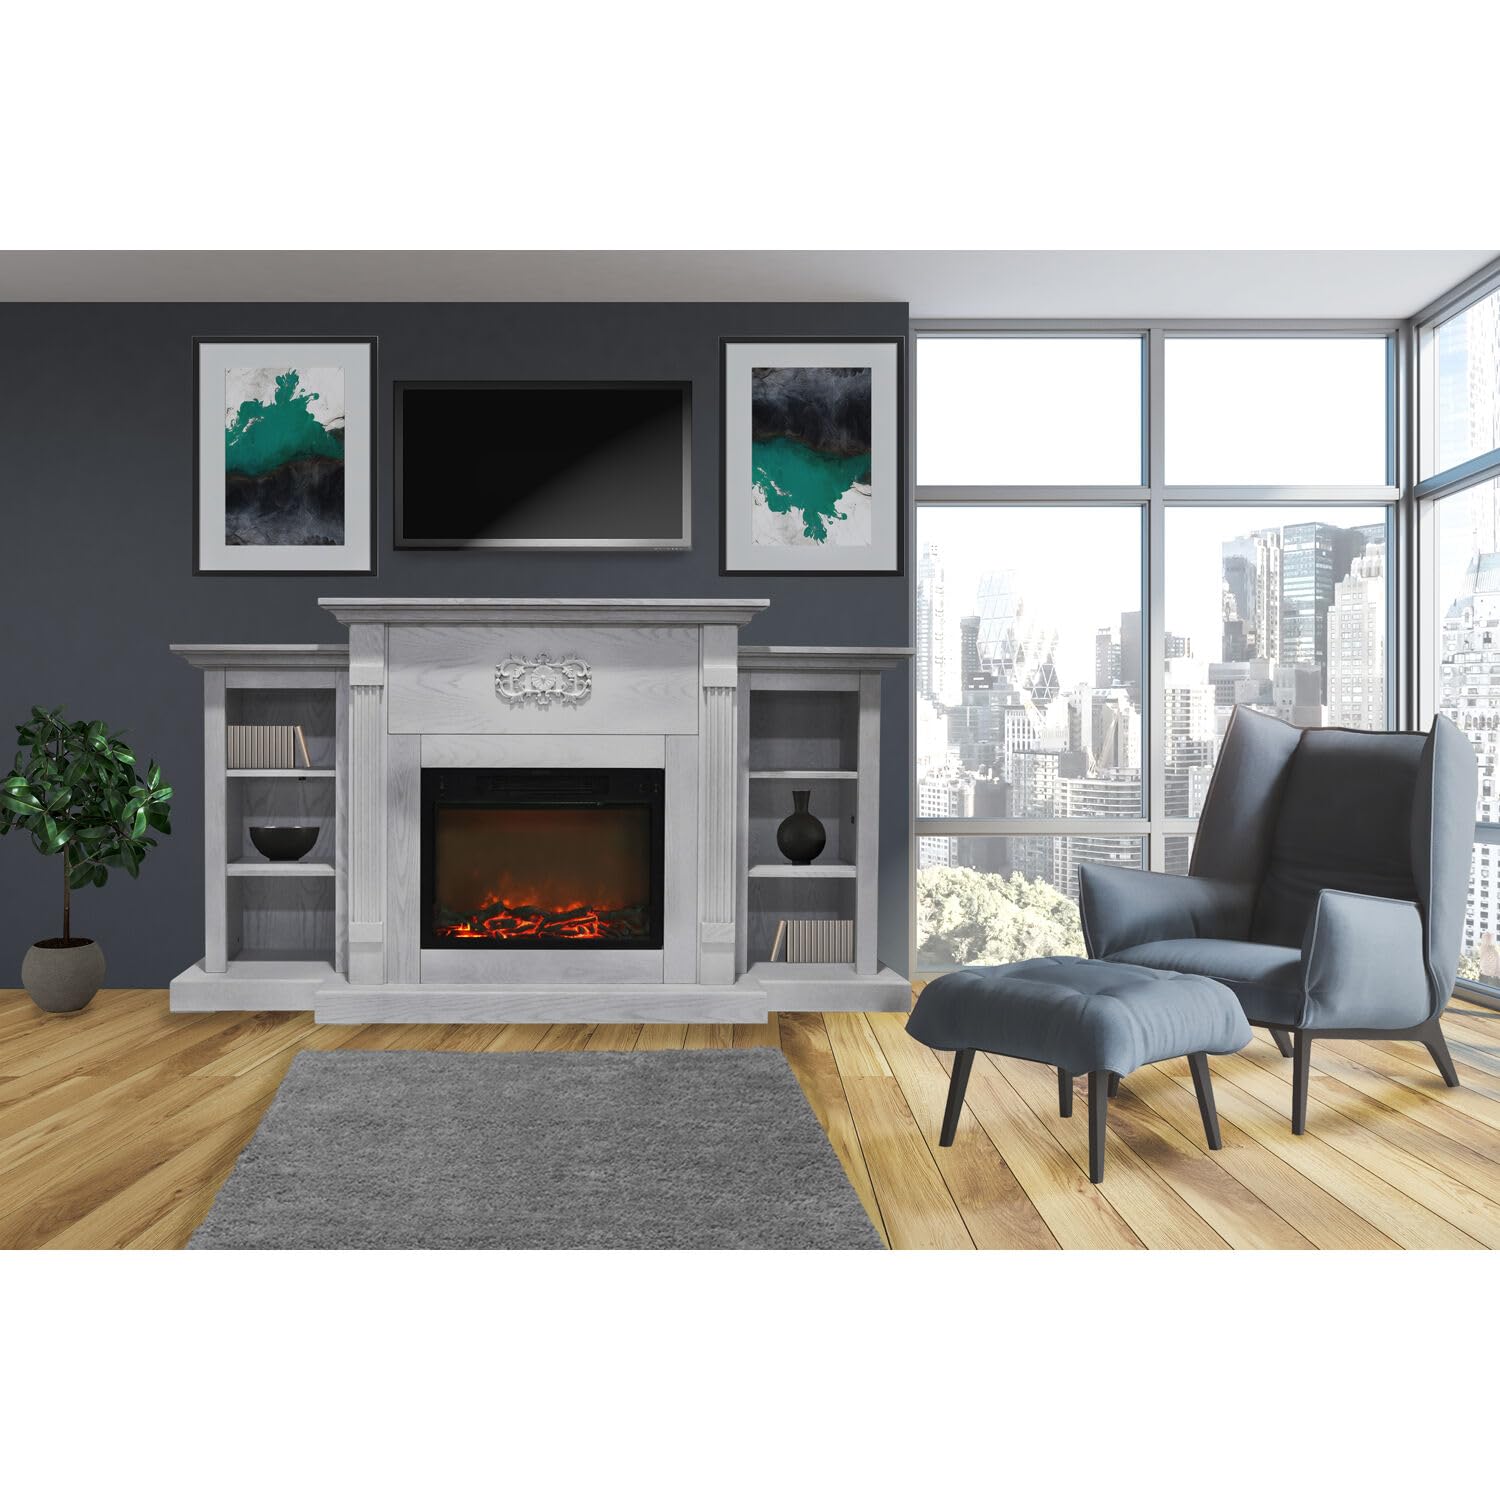 Hanover Classic 72 in. Electric Fireplace in White with Built-in Bookshelves and a 1500W Charred Log Insert